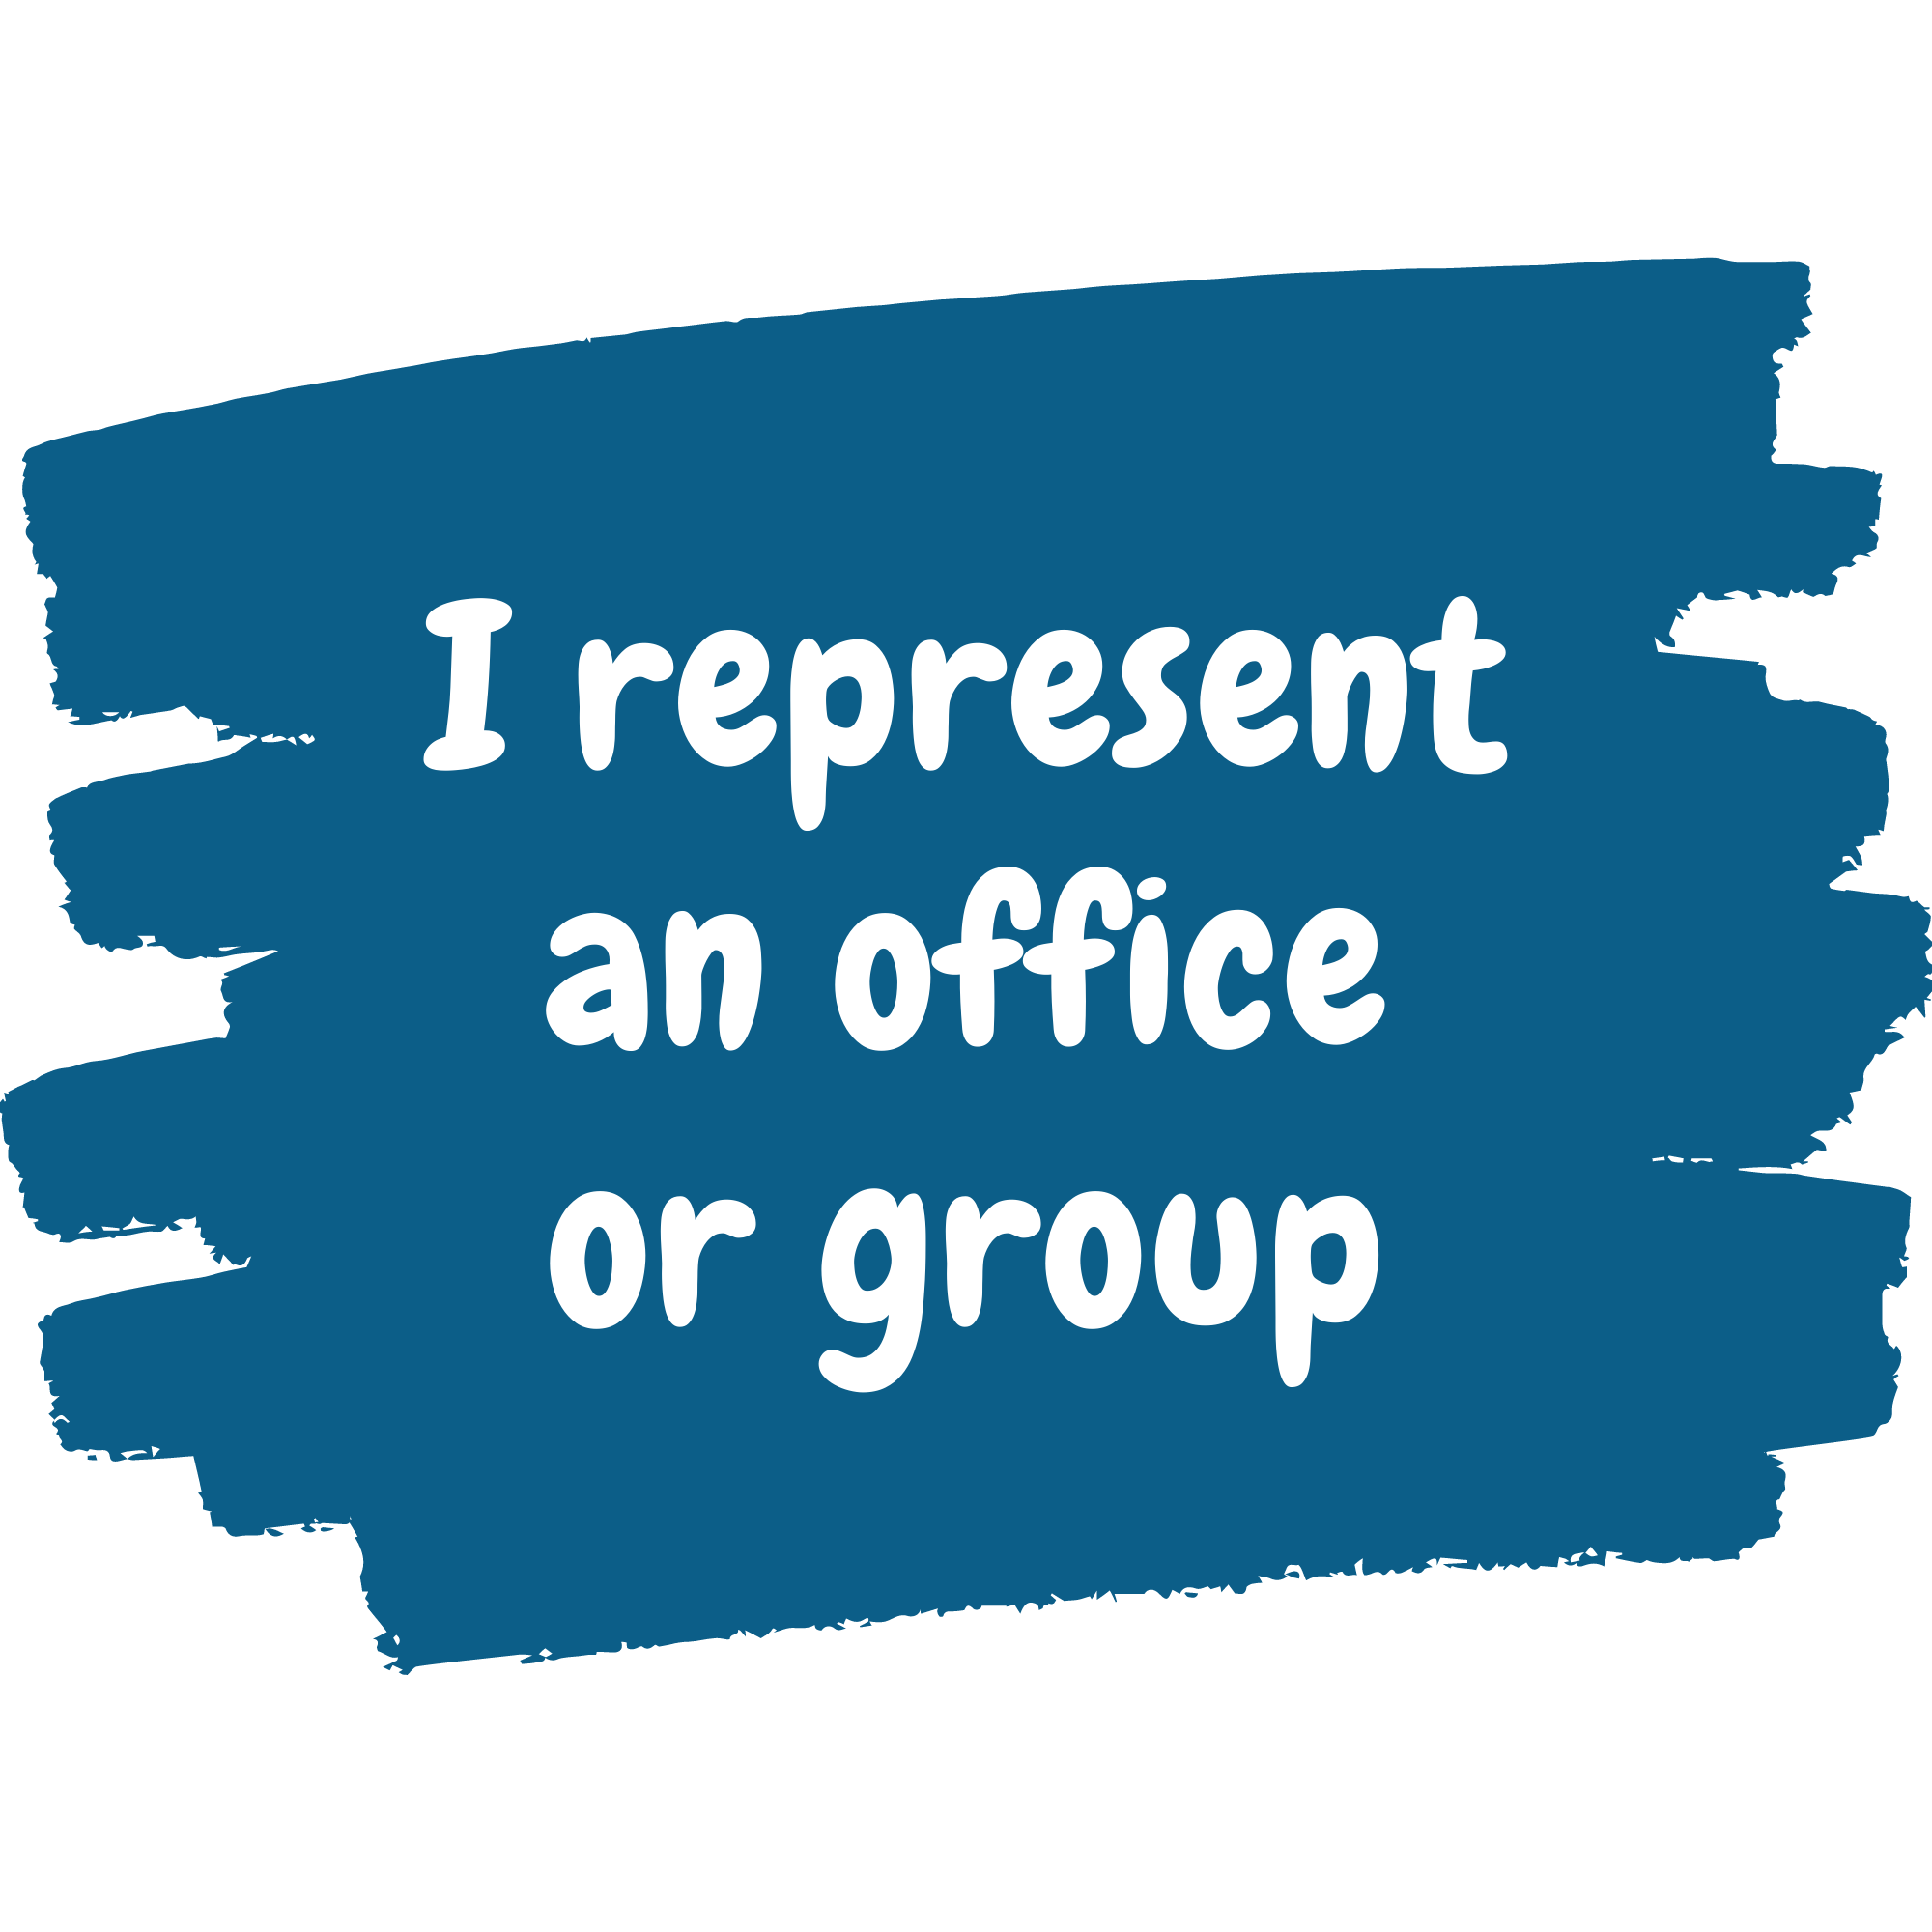 I represent an office or group